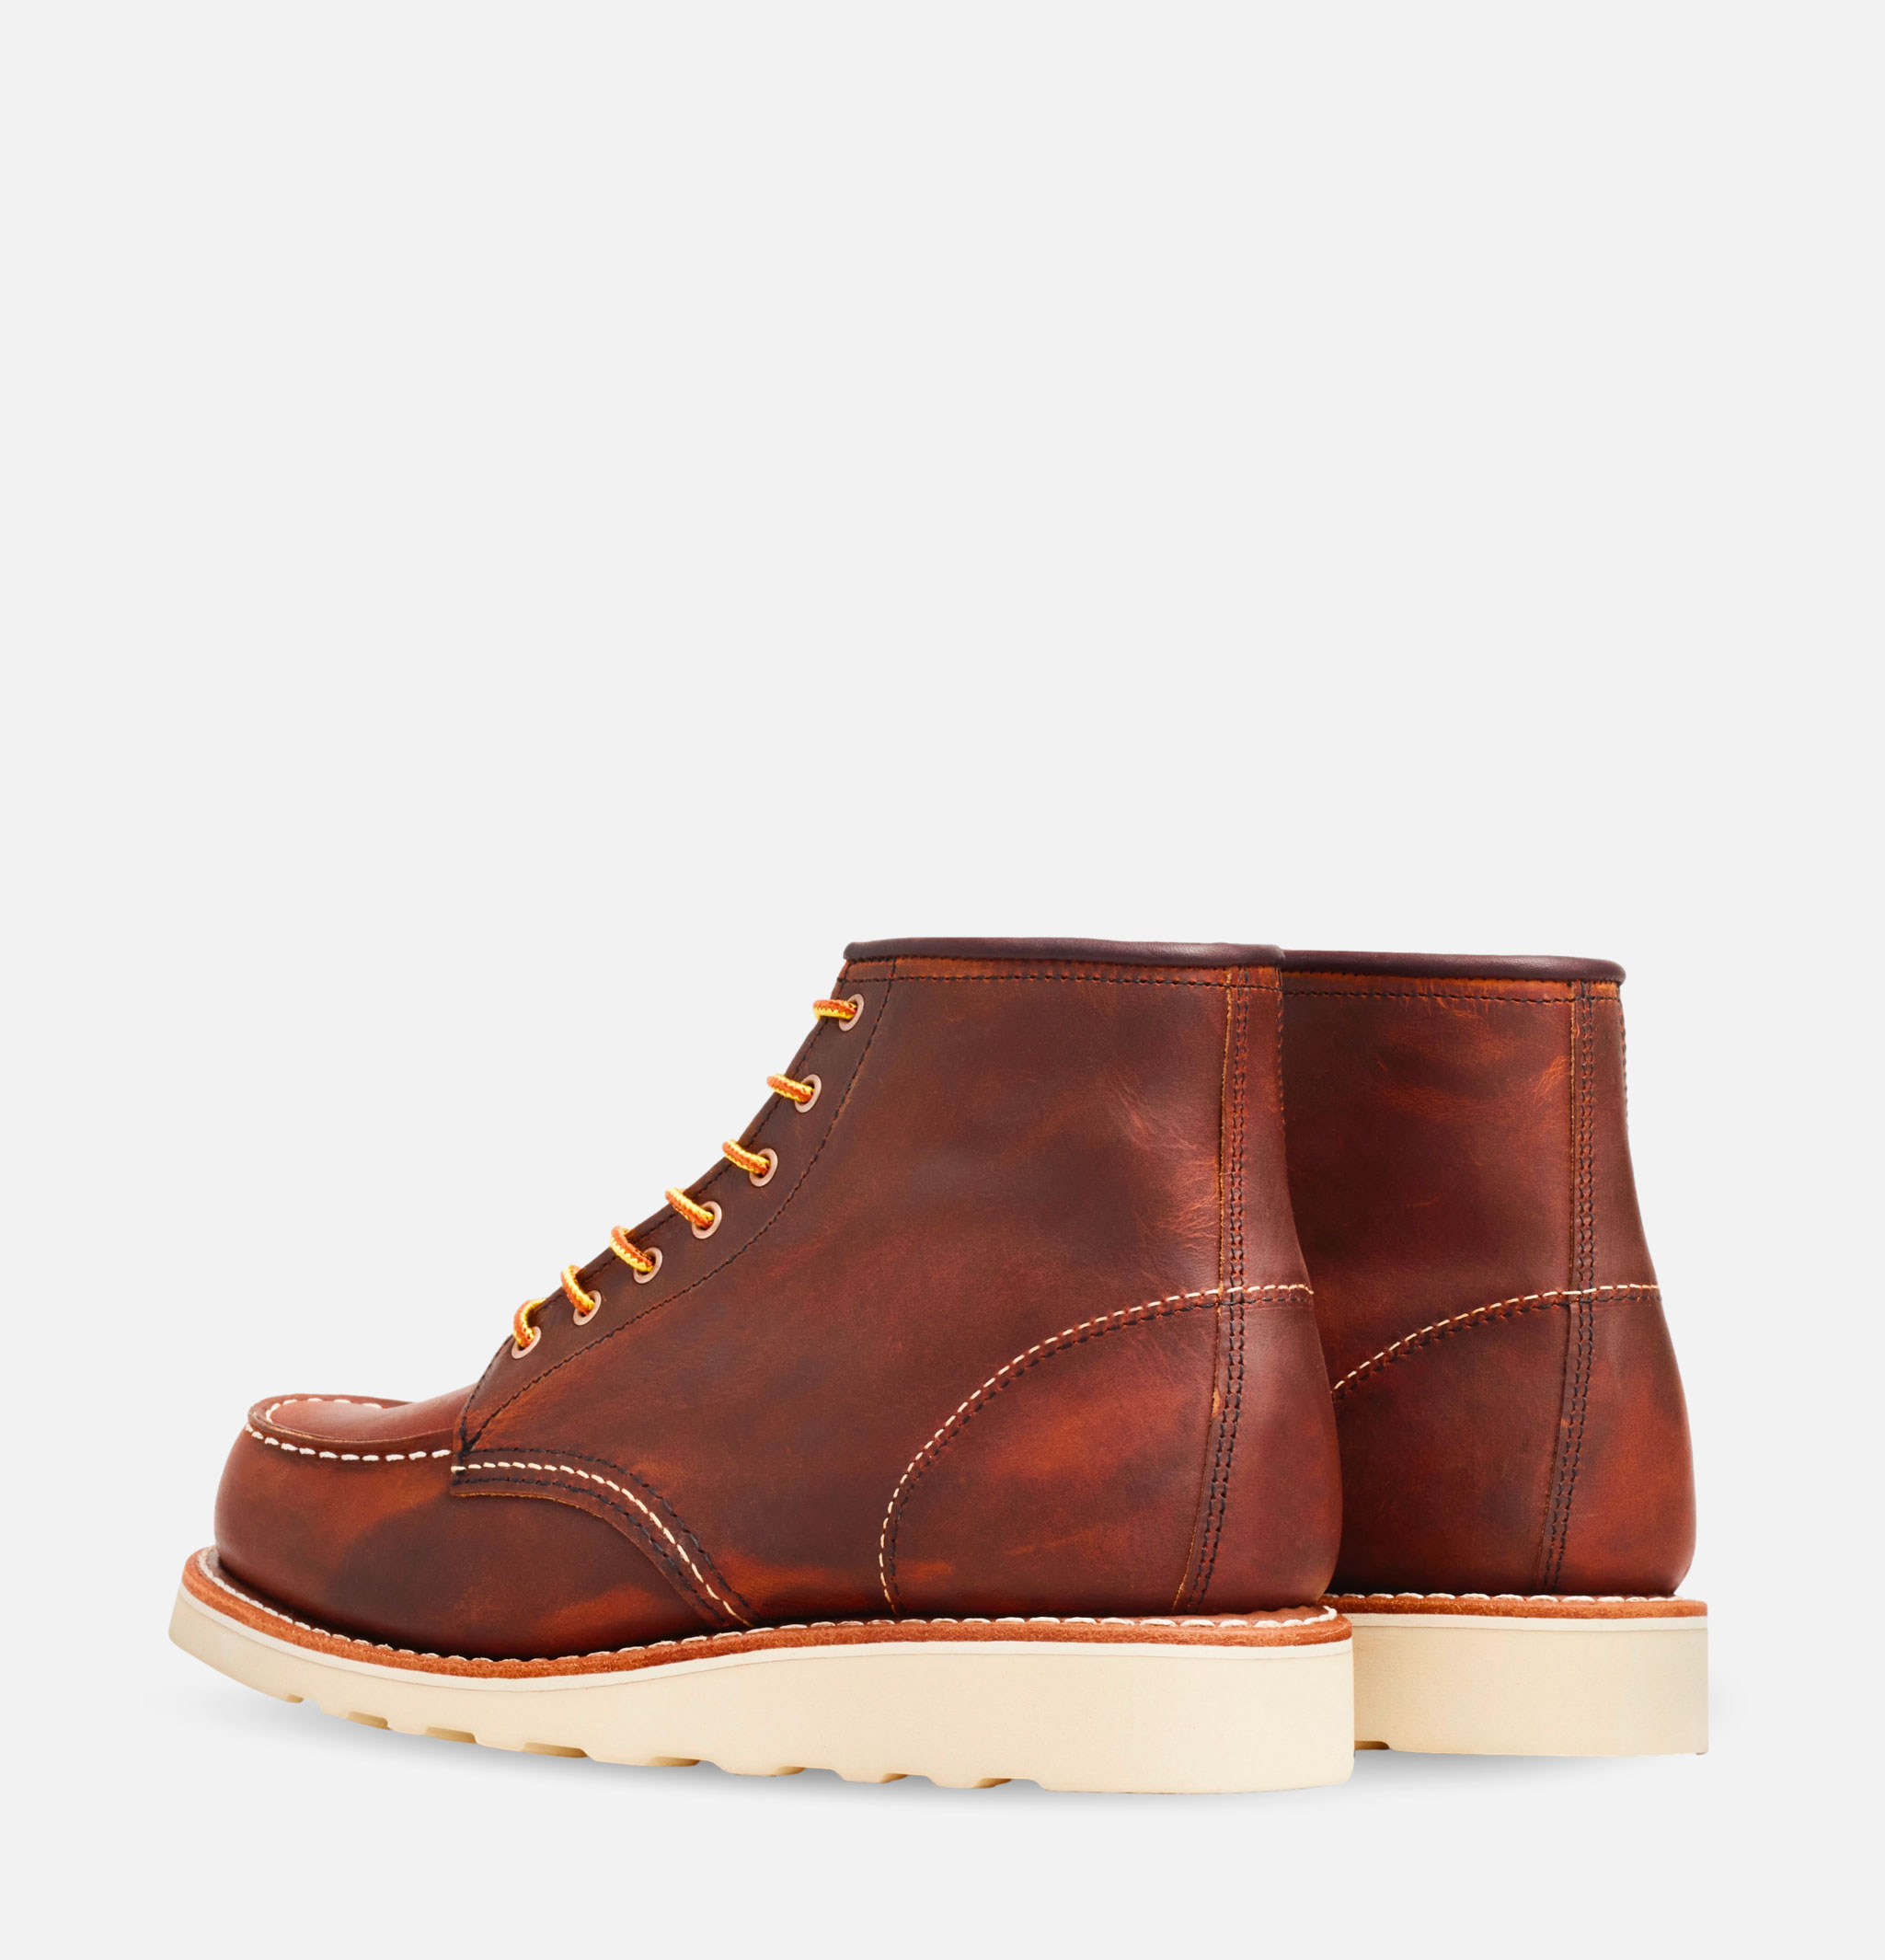 Red Wing Shoes Femme - 3428 - Moc Toe Rough and Tough